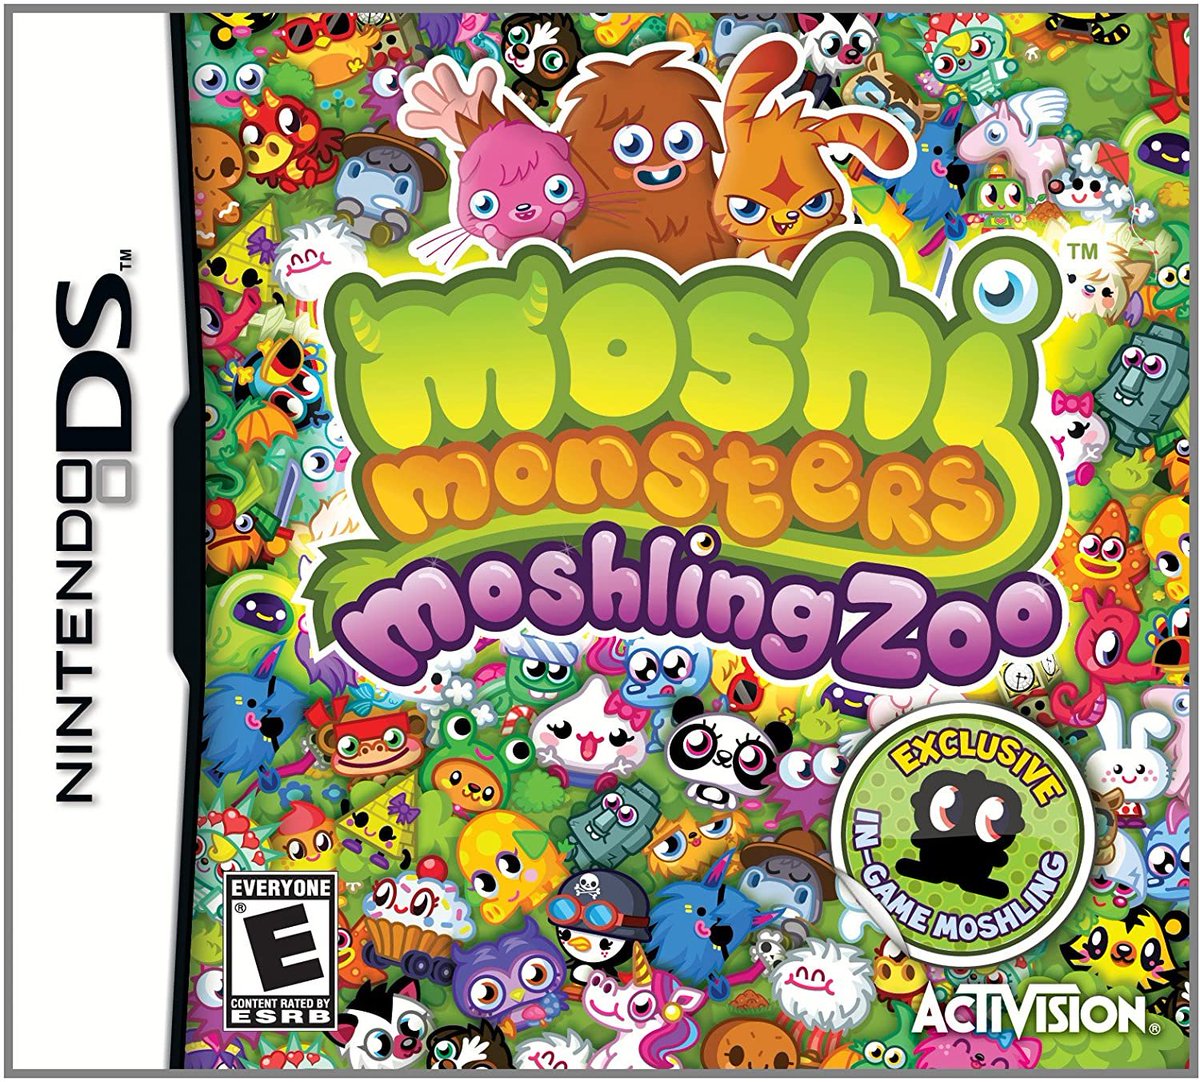 second we have moshi monsters! don't remember which one I had but it was fun!